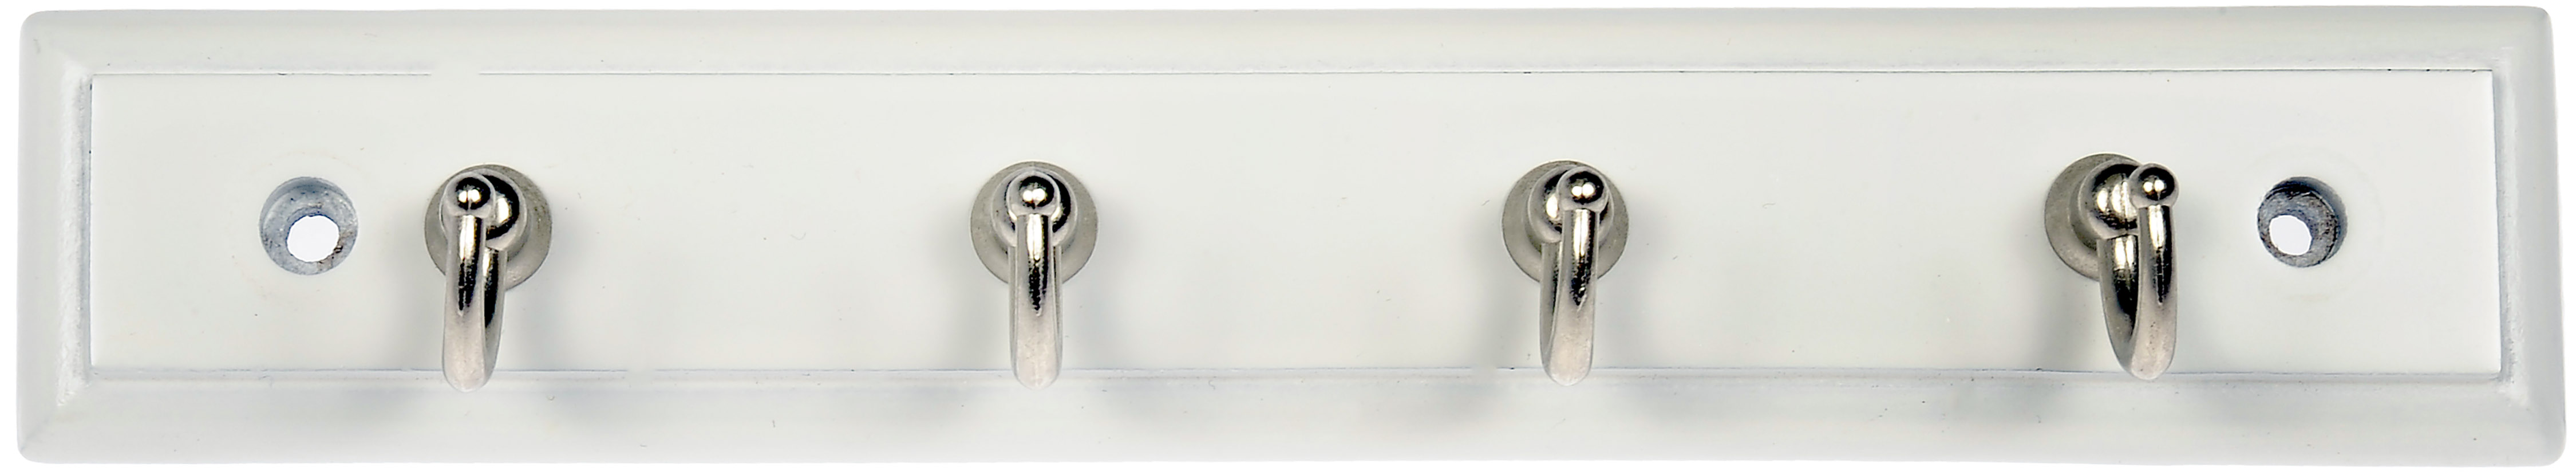 Mainstays, 8.75 Inch Key Rack, With 4 Hooks, White, Mounting Hardware Included, 2 lbs. Working Capacity - image 5 of 8